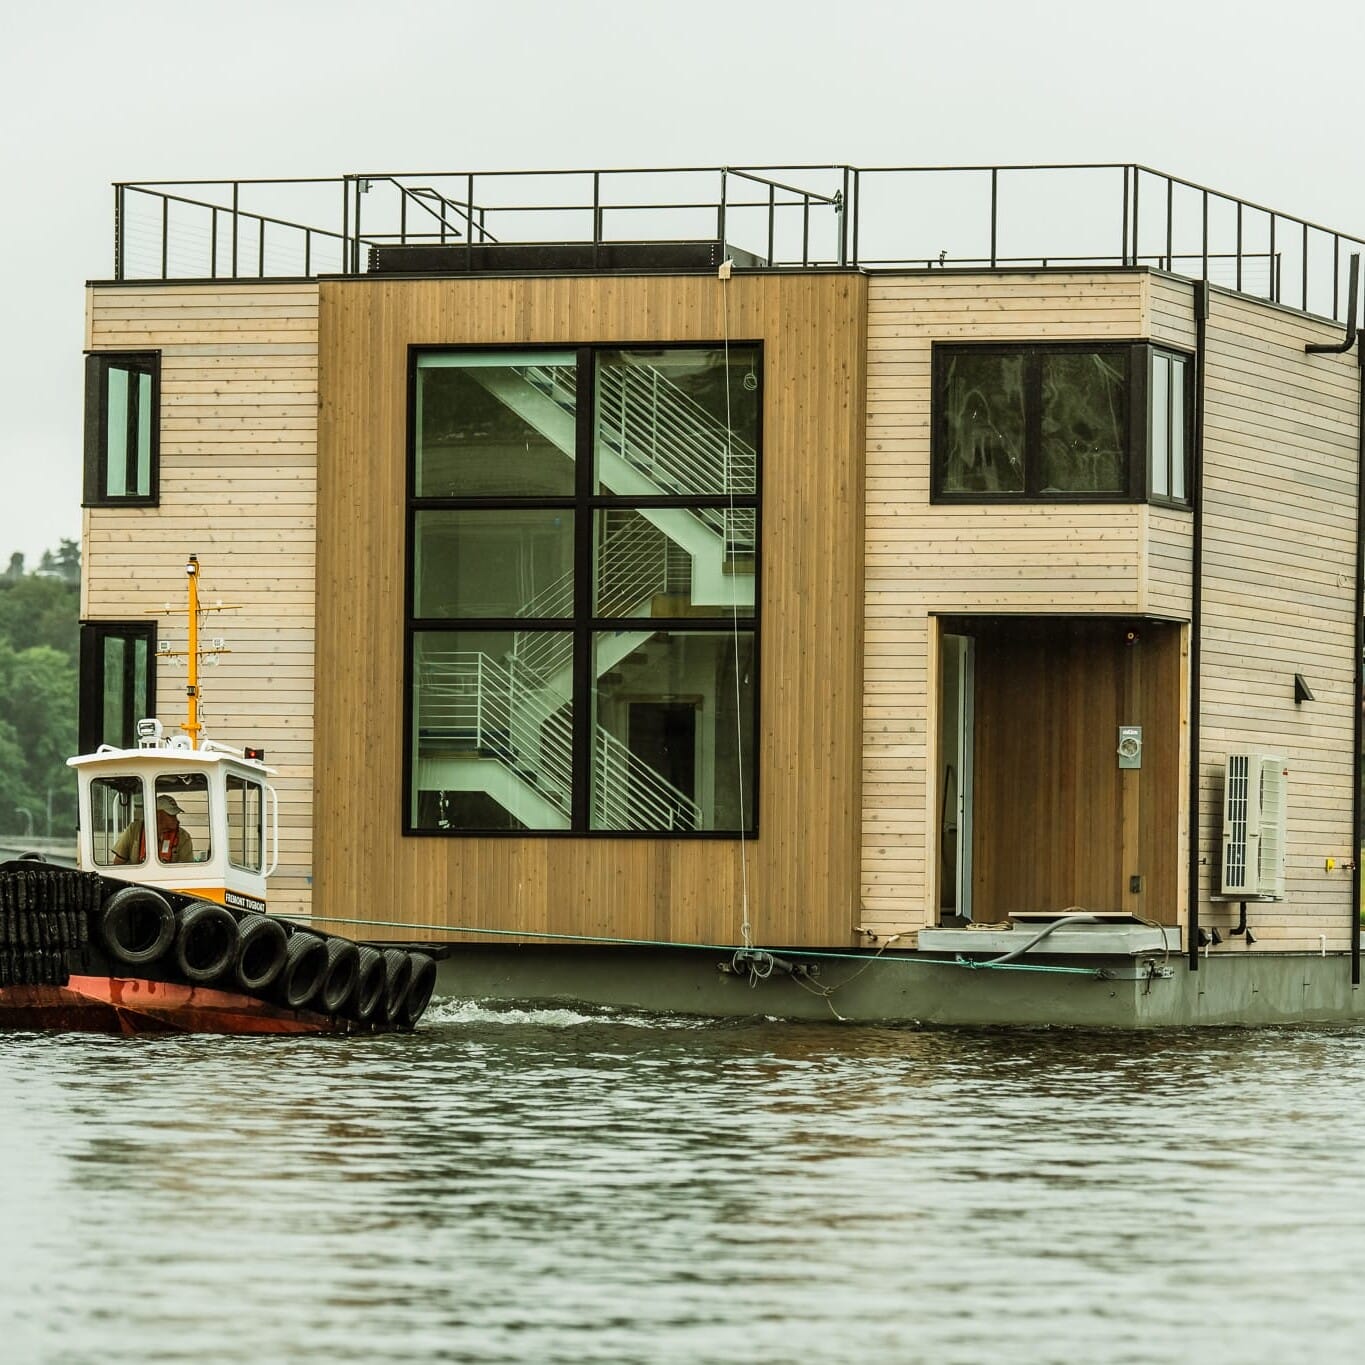 A Seattle Floating Home, a boat with a house on it floating in the water.